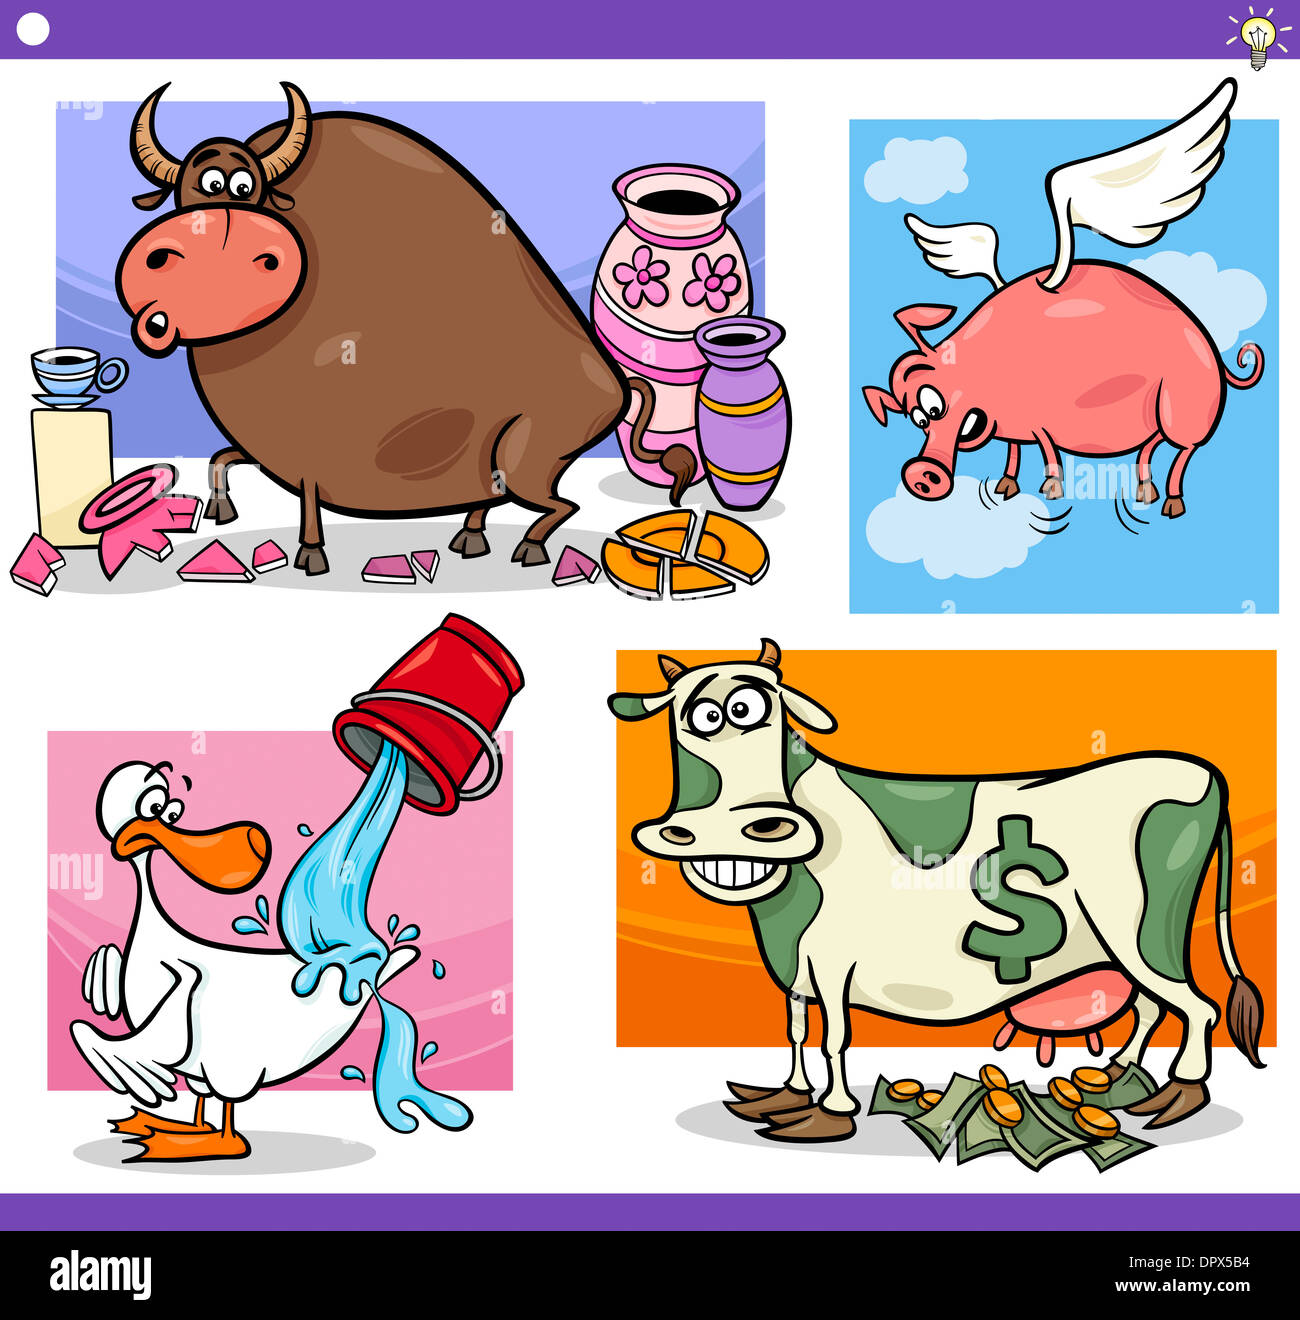 Illustration Set of Humorous Cartoon Sayings or Proverbs Concepts and Metaphors with Funny Animal Characters Stock Photo